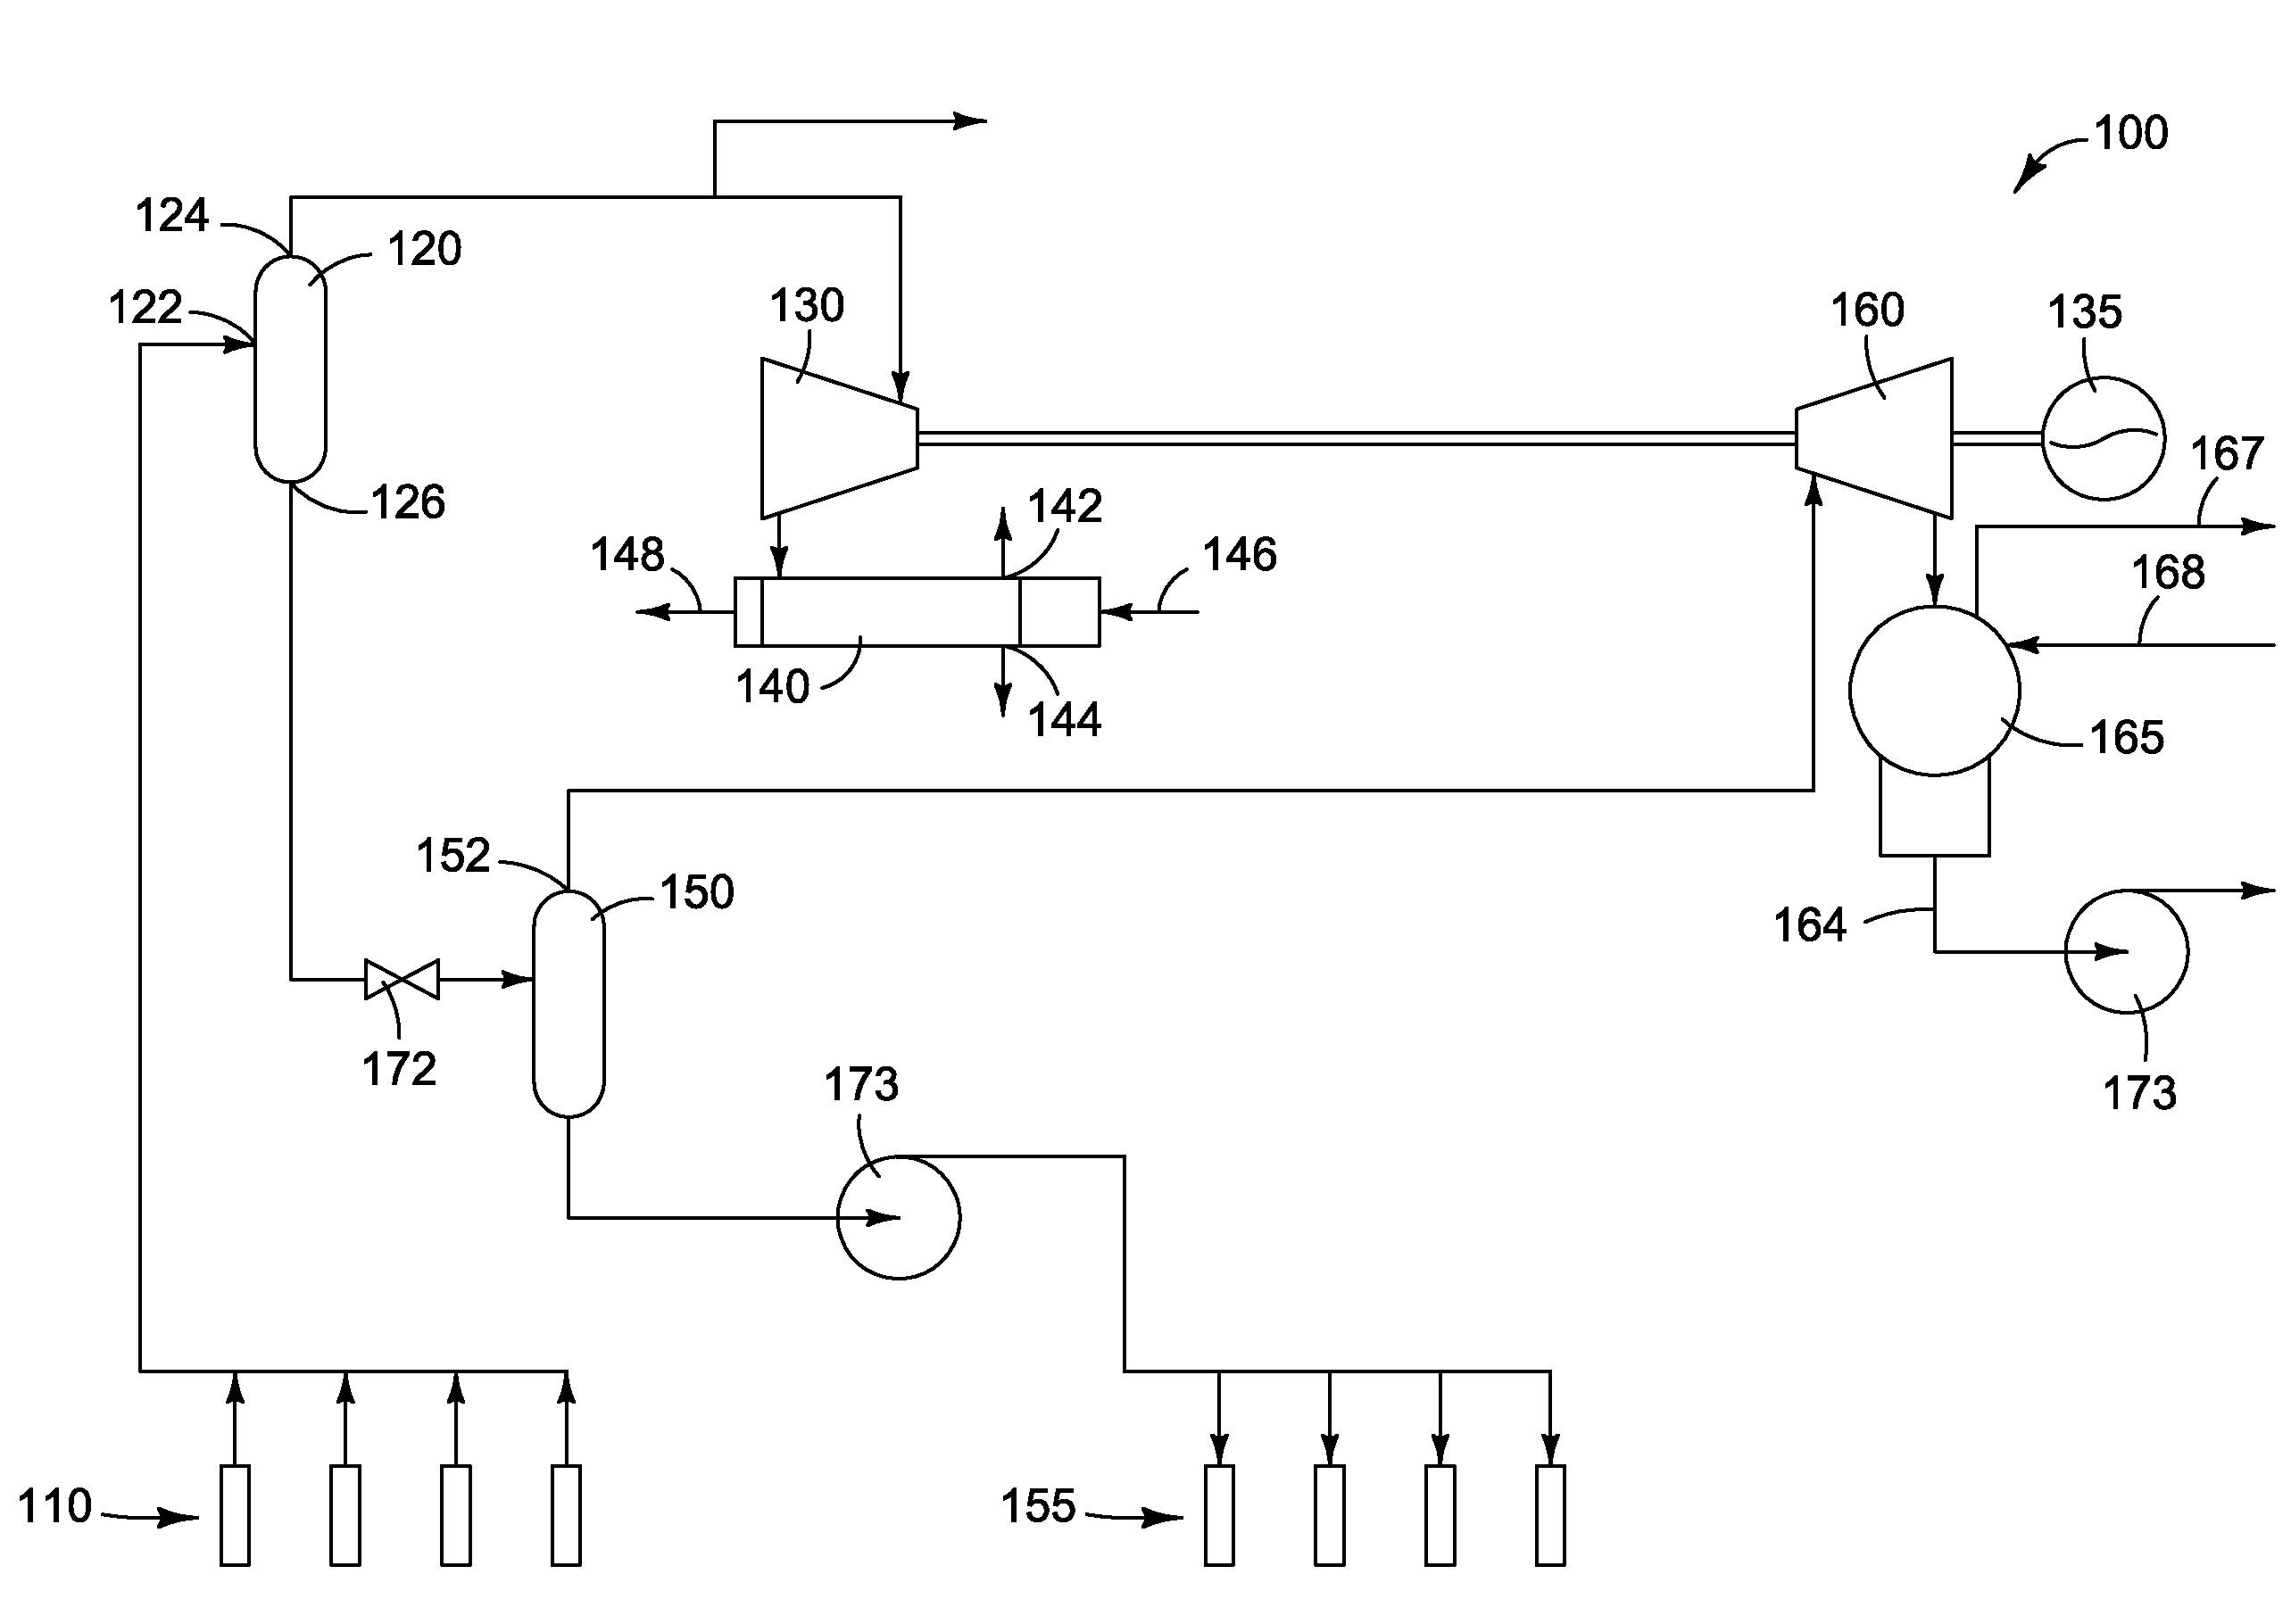 Geothermal power generation system and method of making power using the system